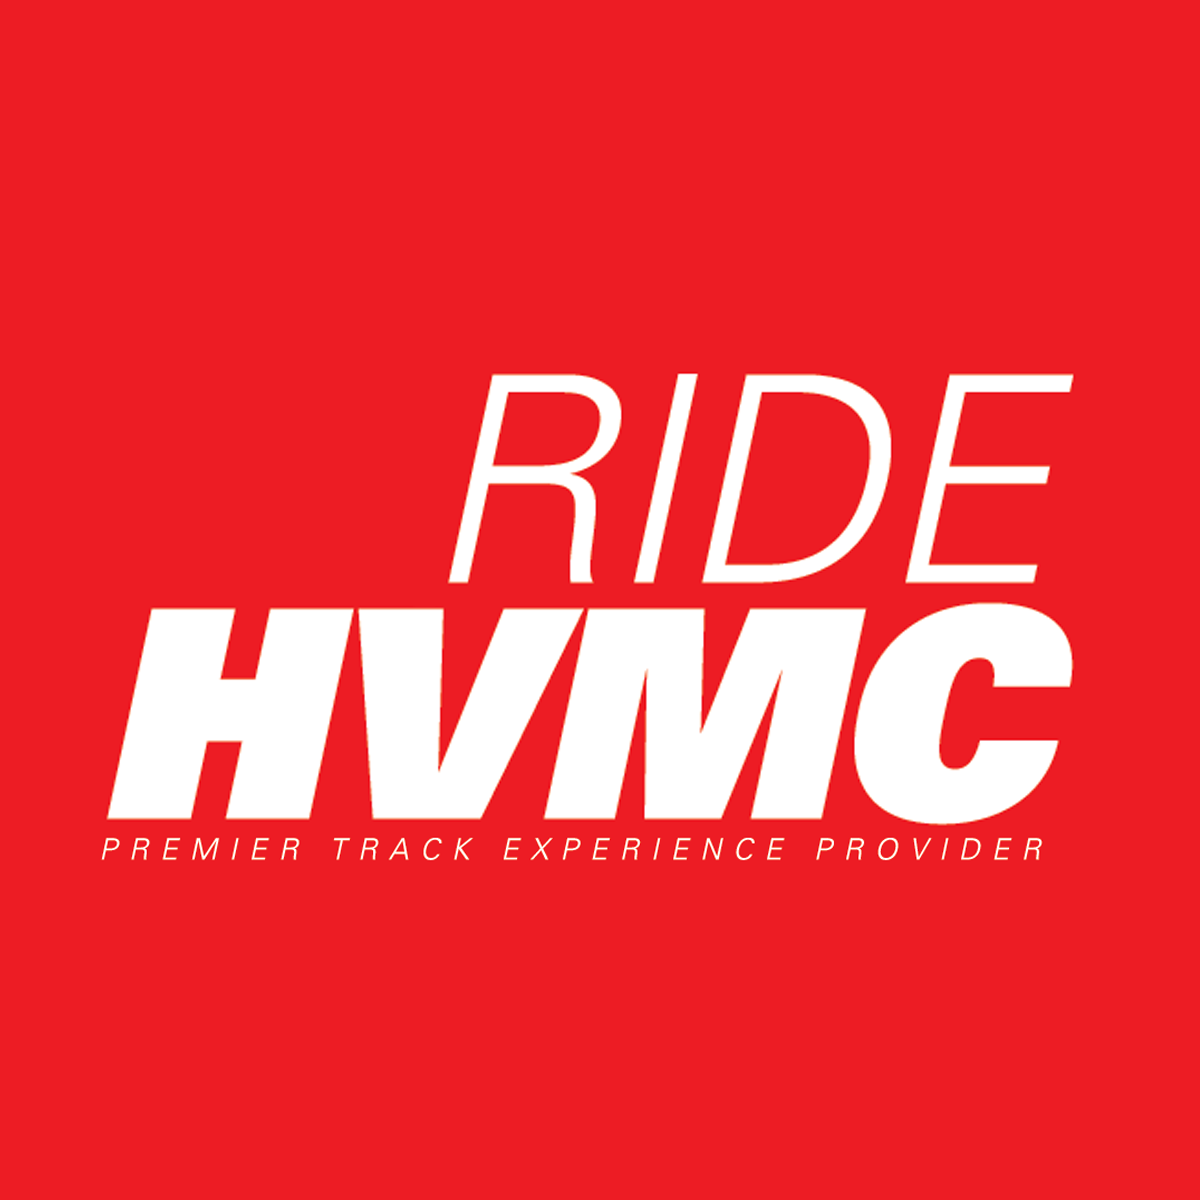 RideHVMC - Premier Motorcycle Track Experience Provider